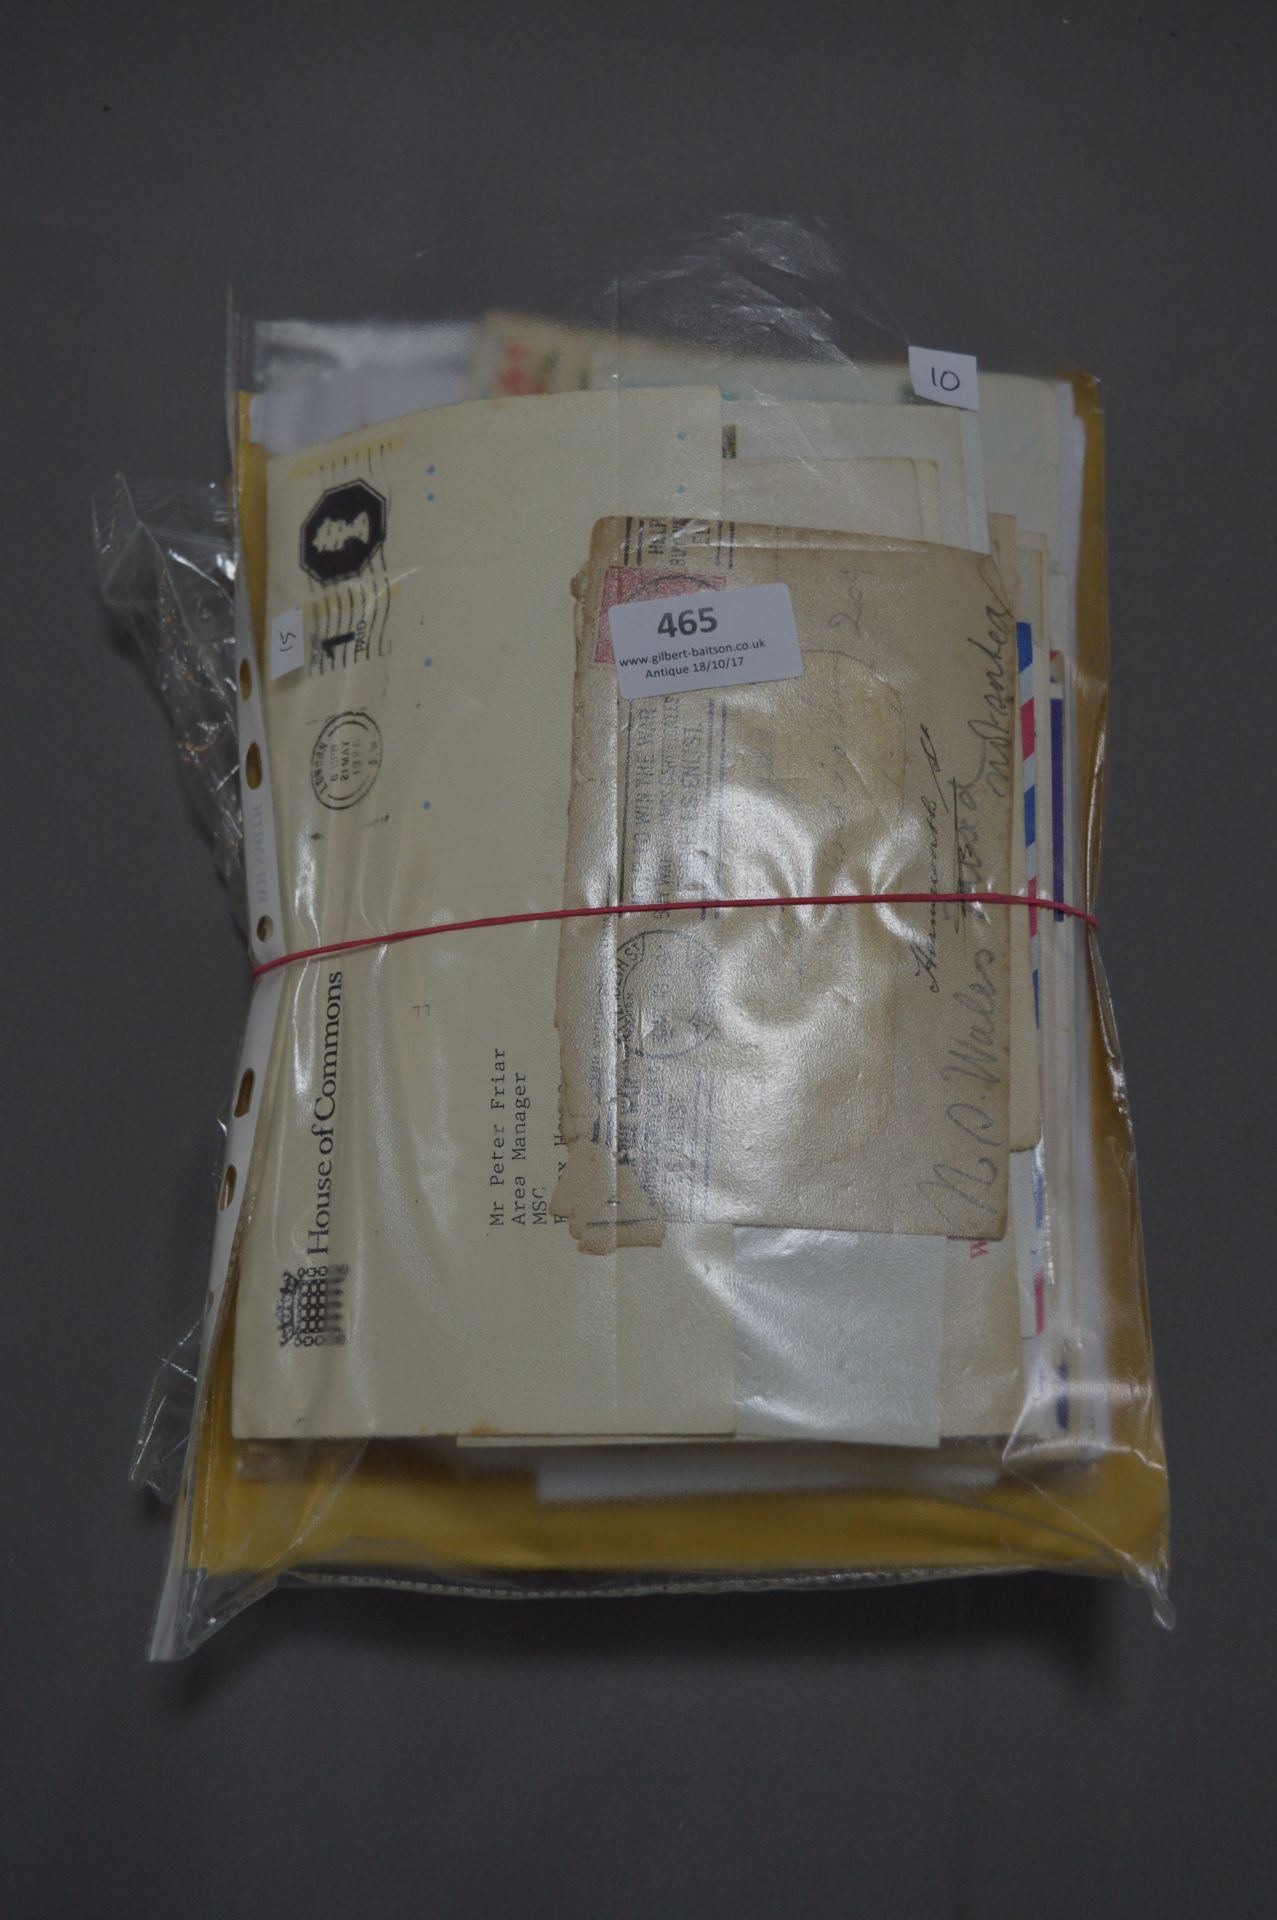 Bag containing Stamped Envelopes